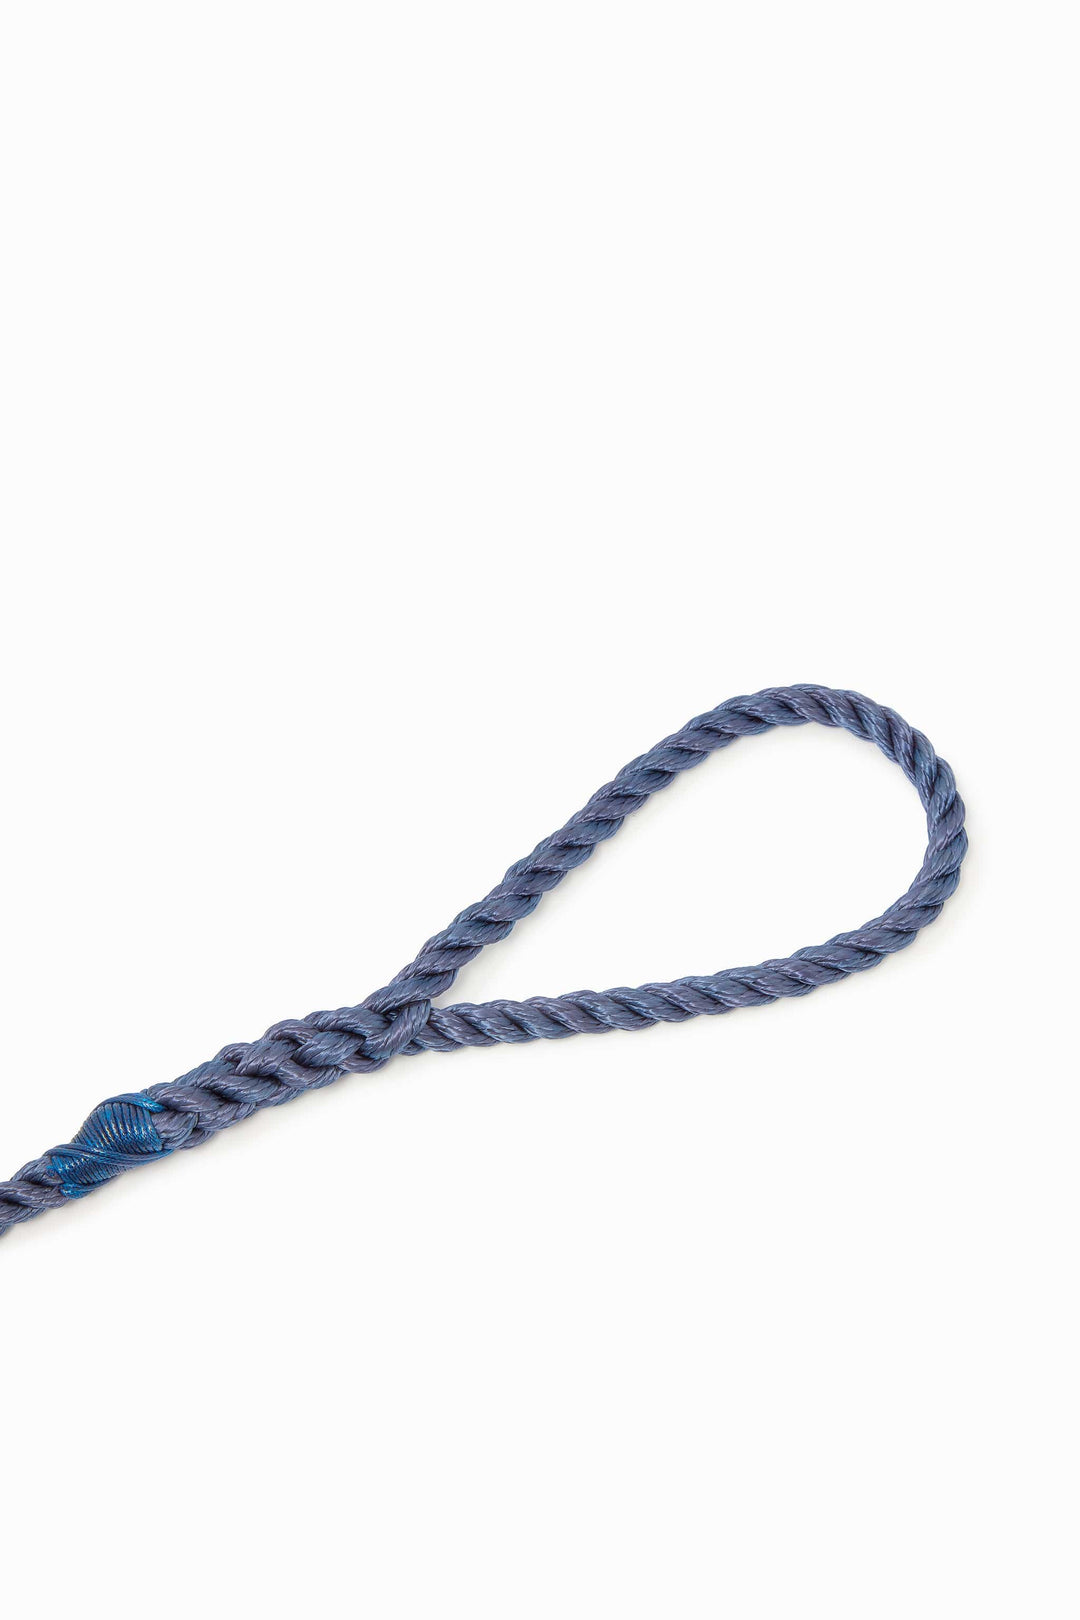 Rope dog slip lead for gundogs and training in navy blue, 5ft long